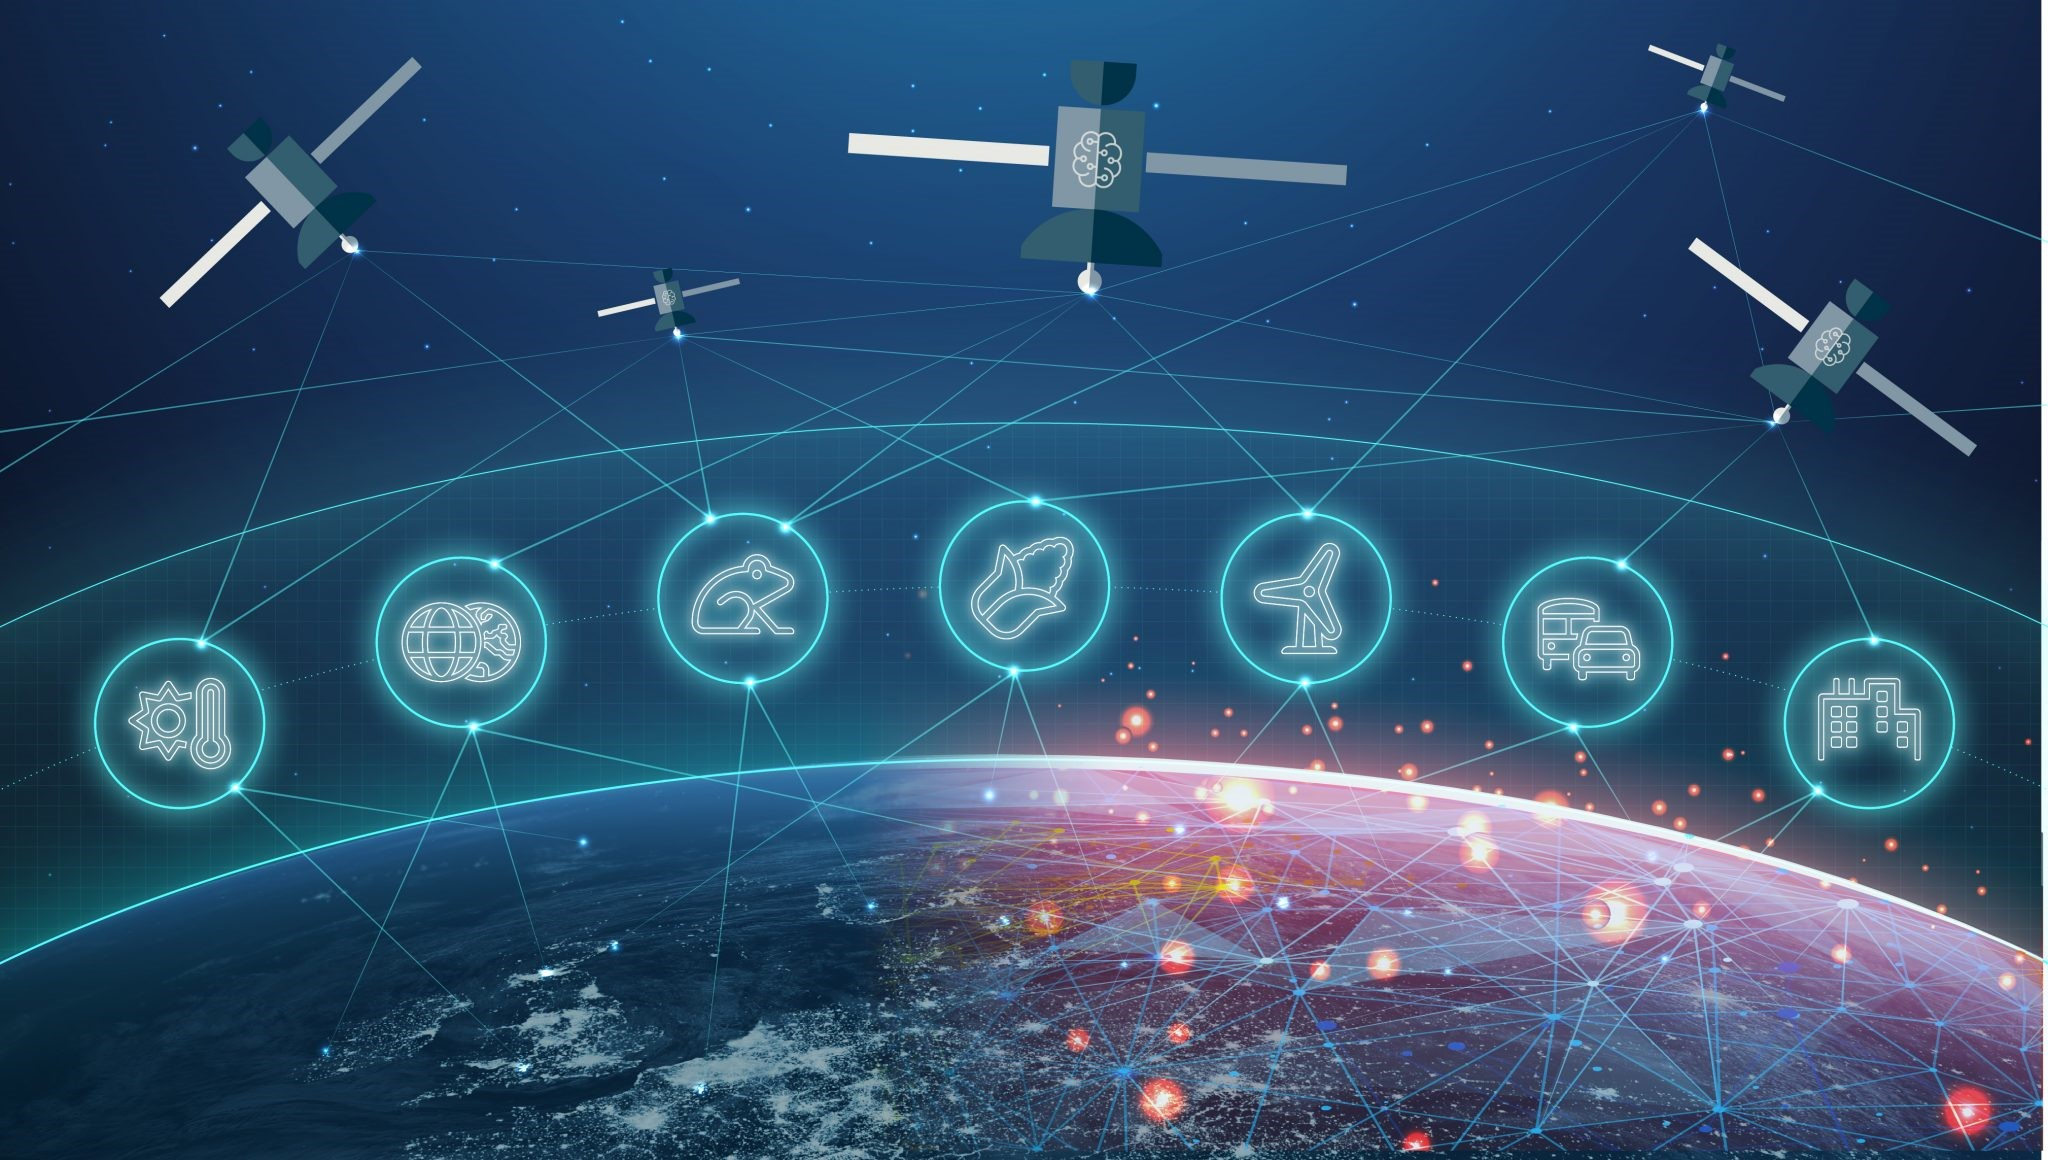 Remote Satellite Systems: Pioneering Satellite Technology for Global Connectivity